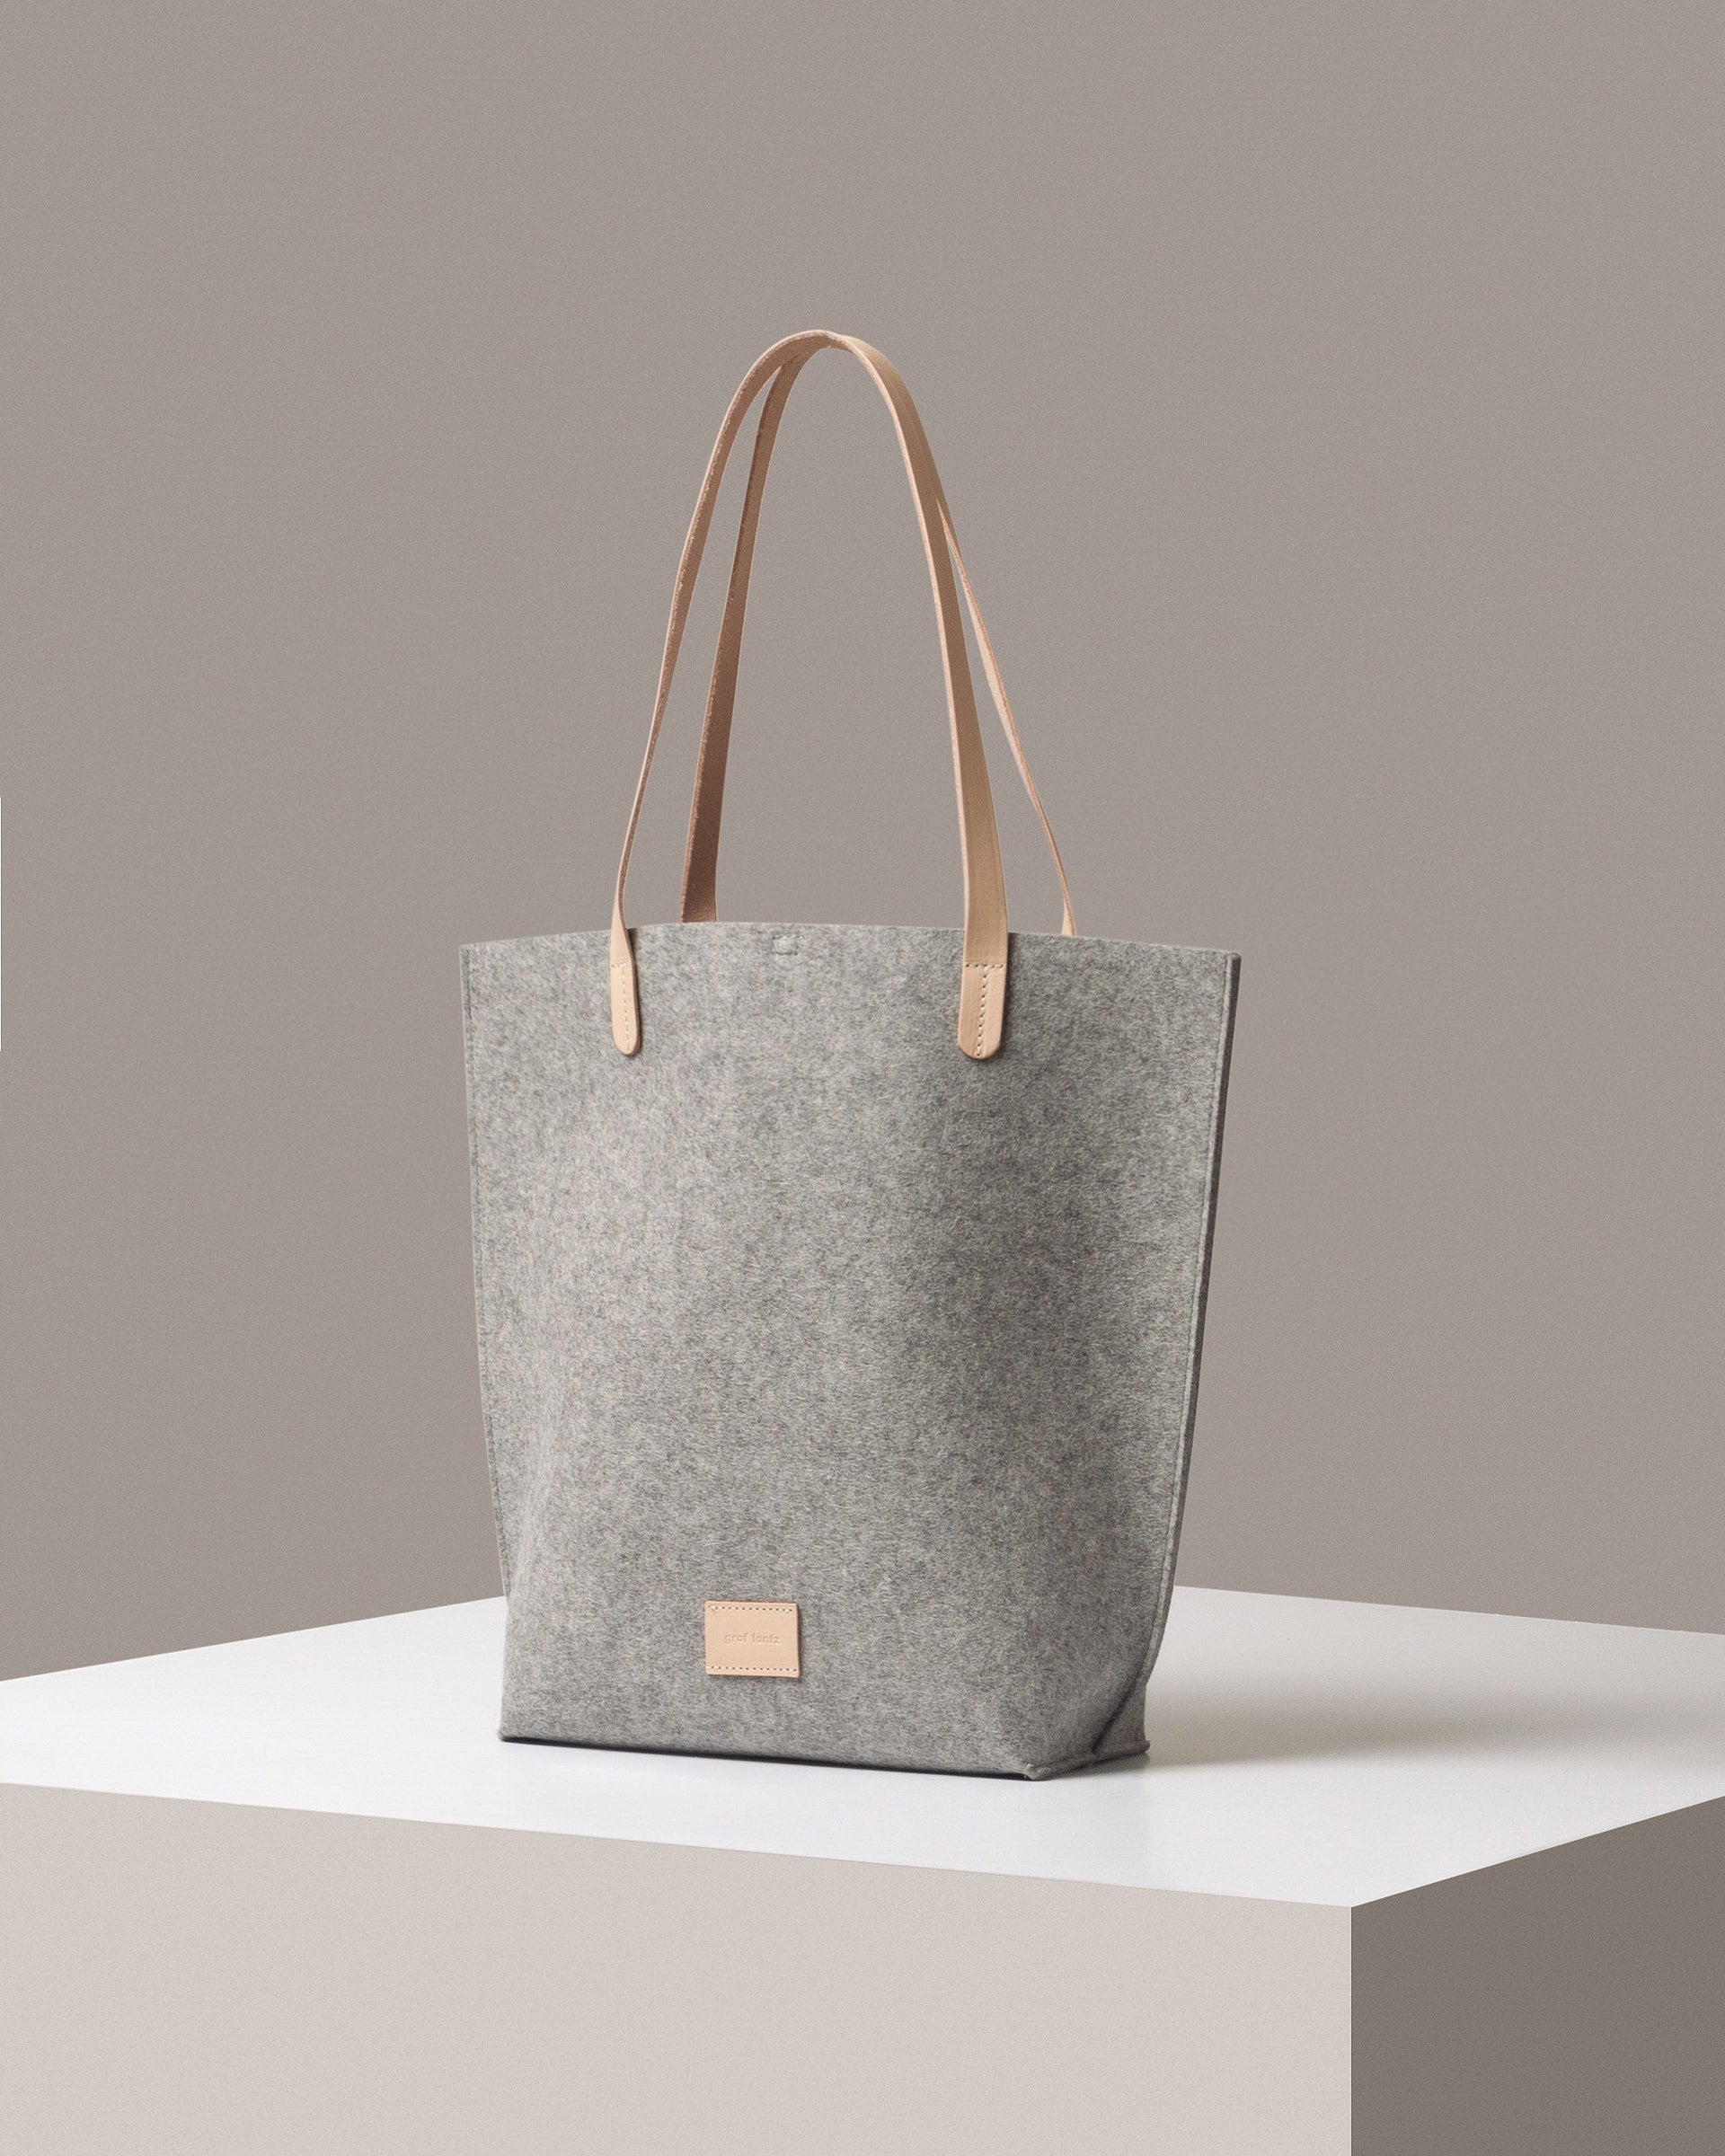 A Hana Merino Wool Felt Tote bag in gray with beige leather handles, displayed in a three-quarter view on a white base